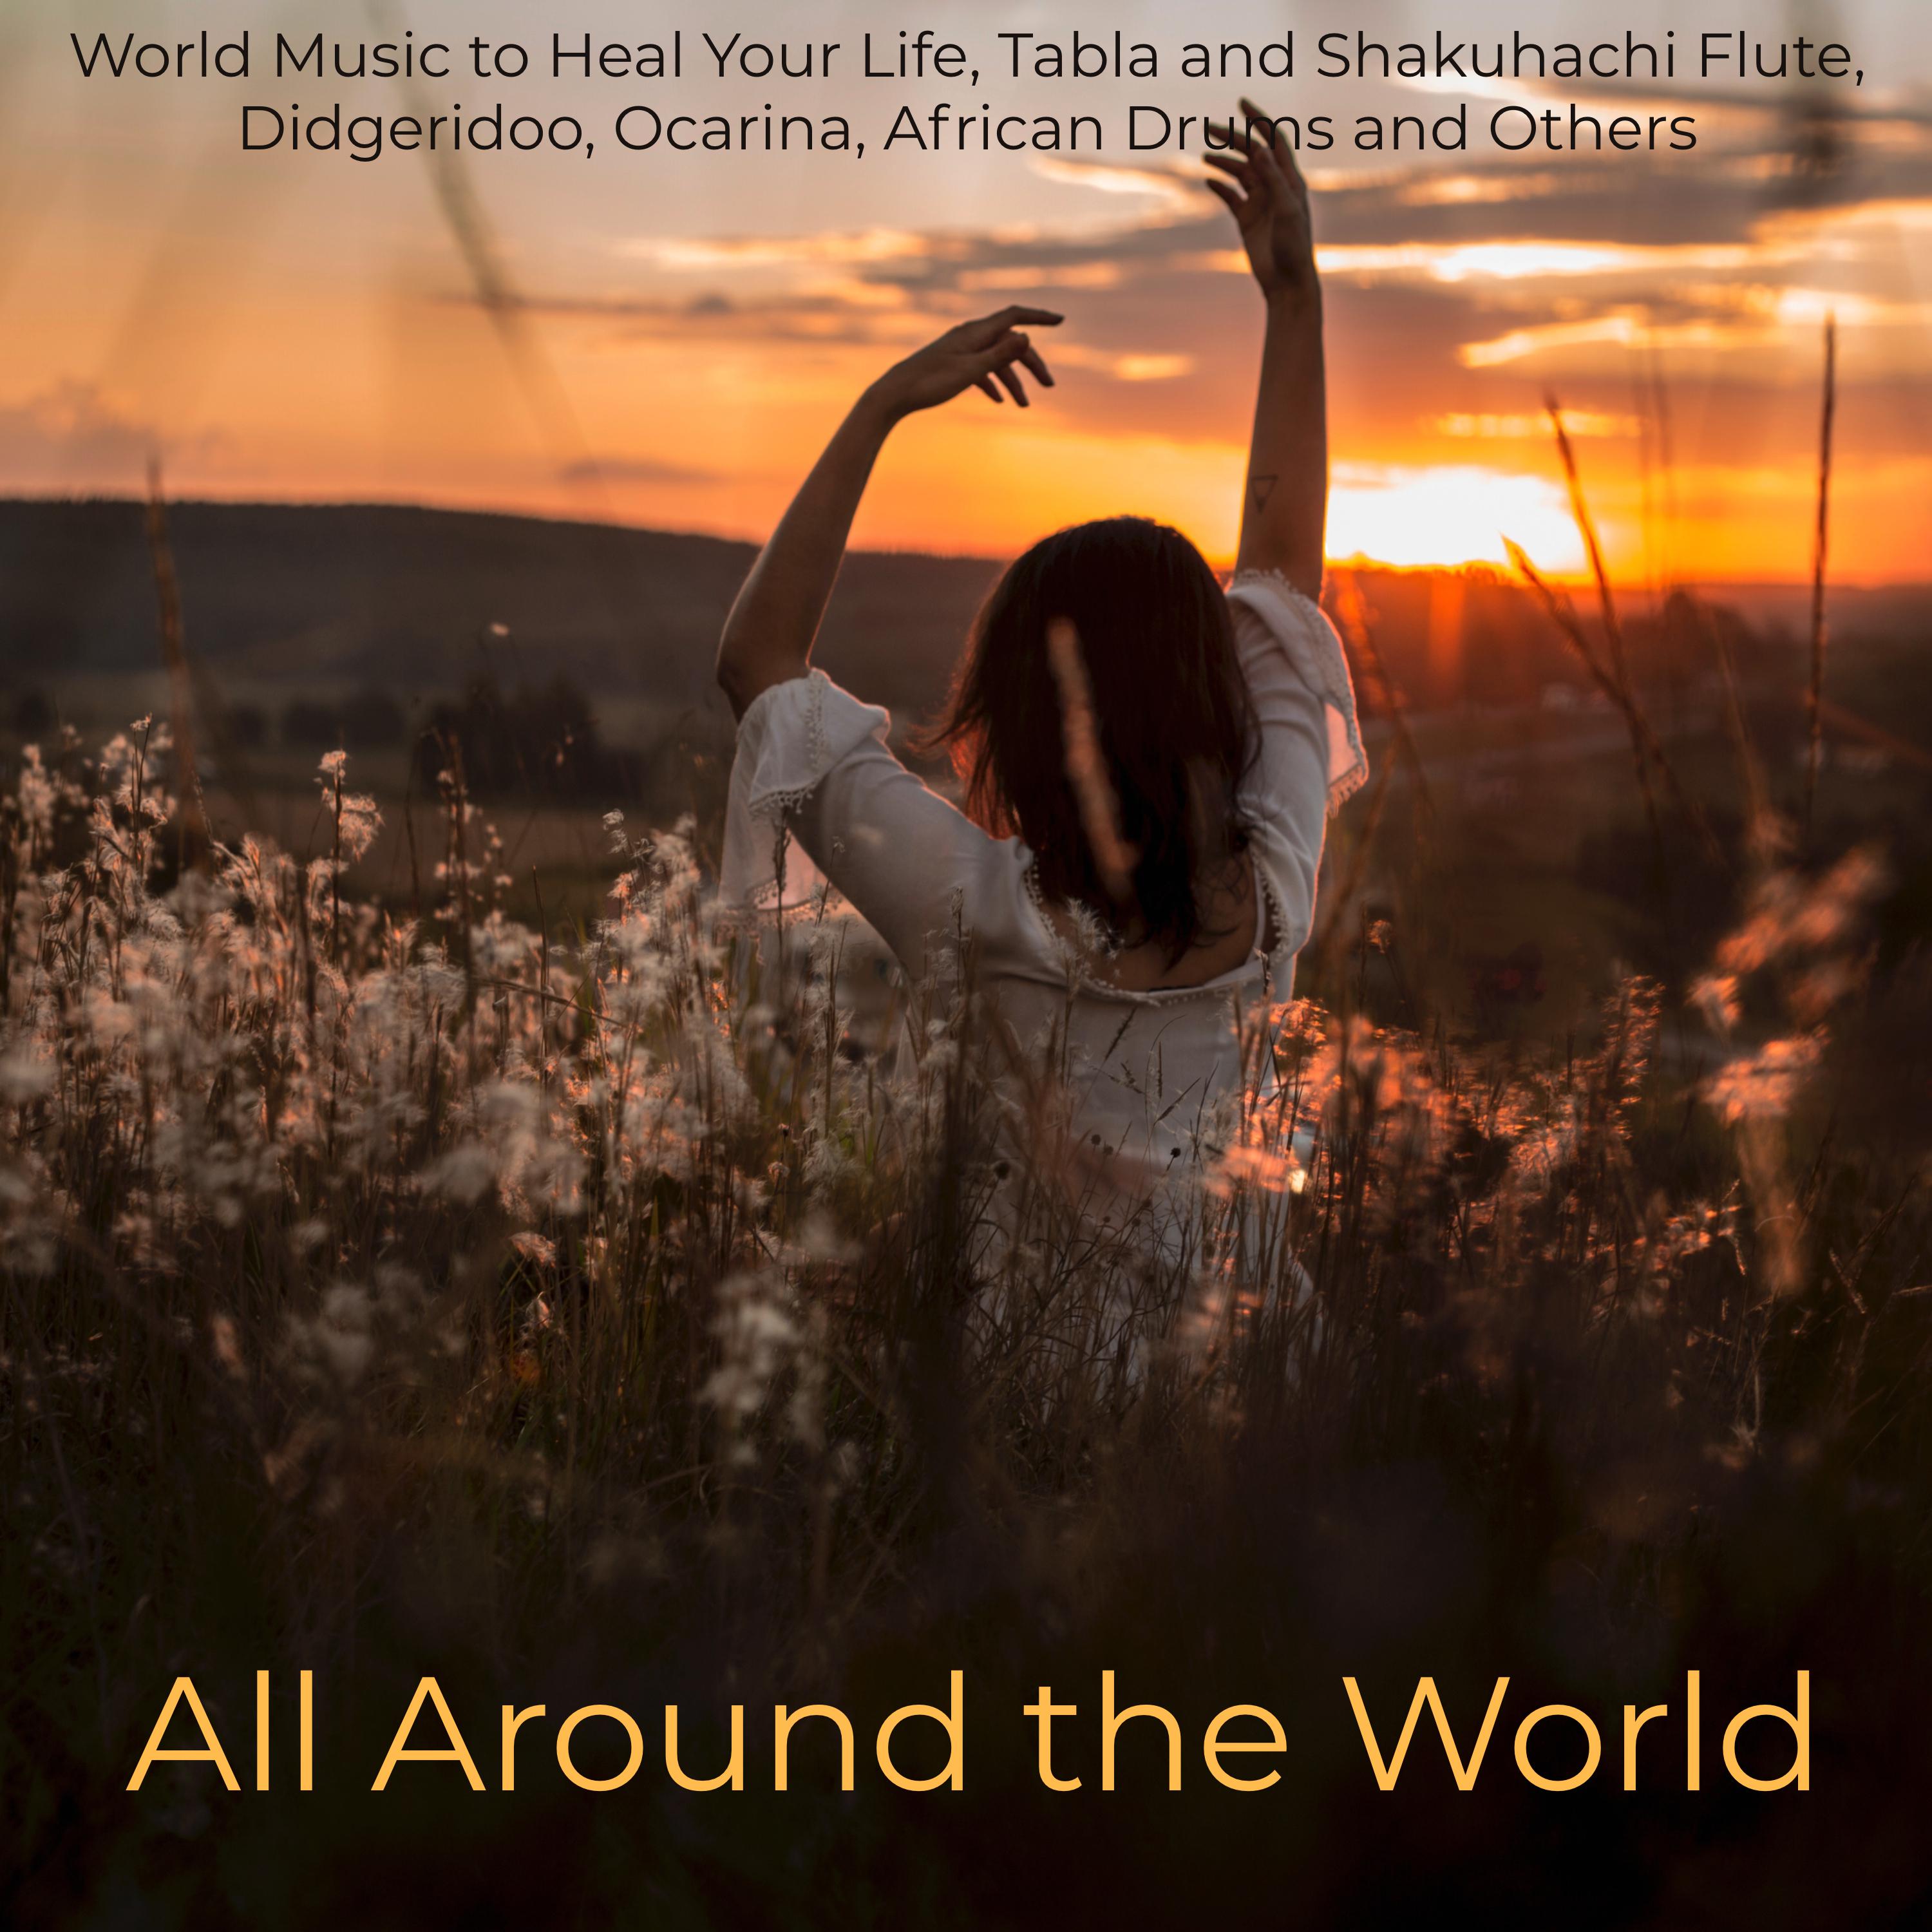 All Around the World  World Music to Heal Your Life, Tabla and Shakuhachi Flute, Didgeridoo, Ocarina, African Drums and Others